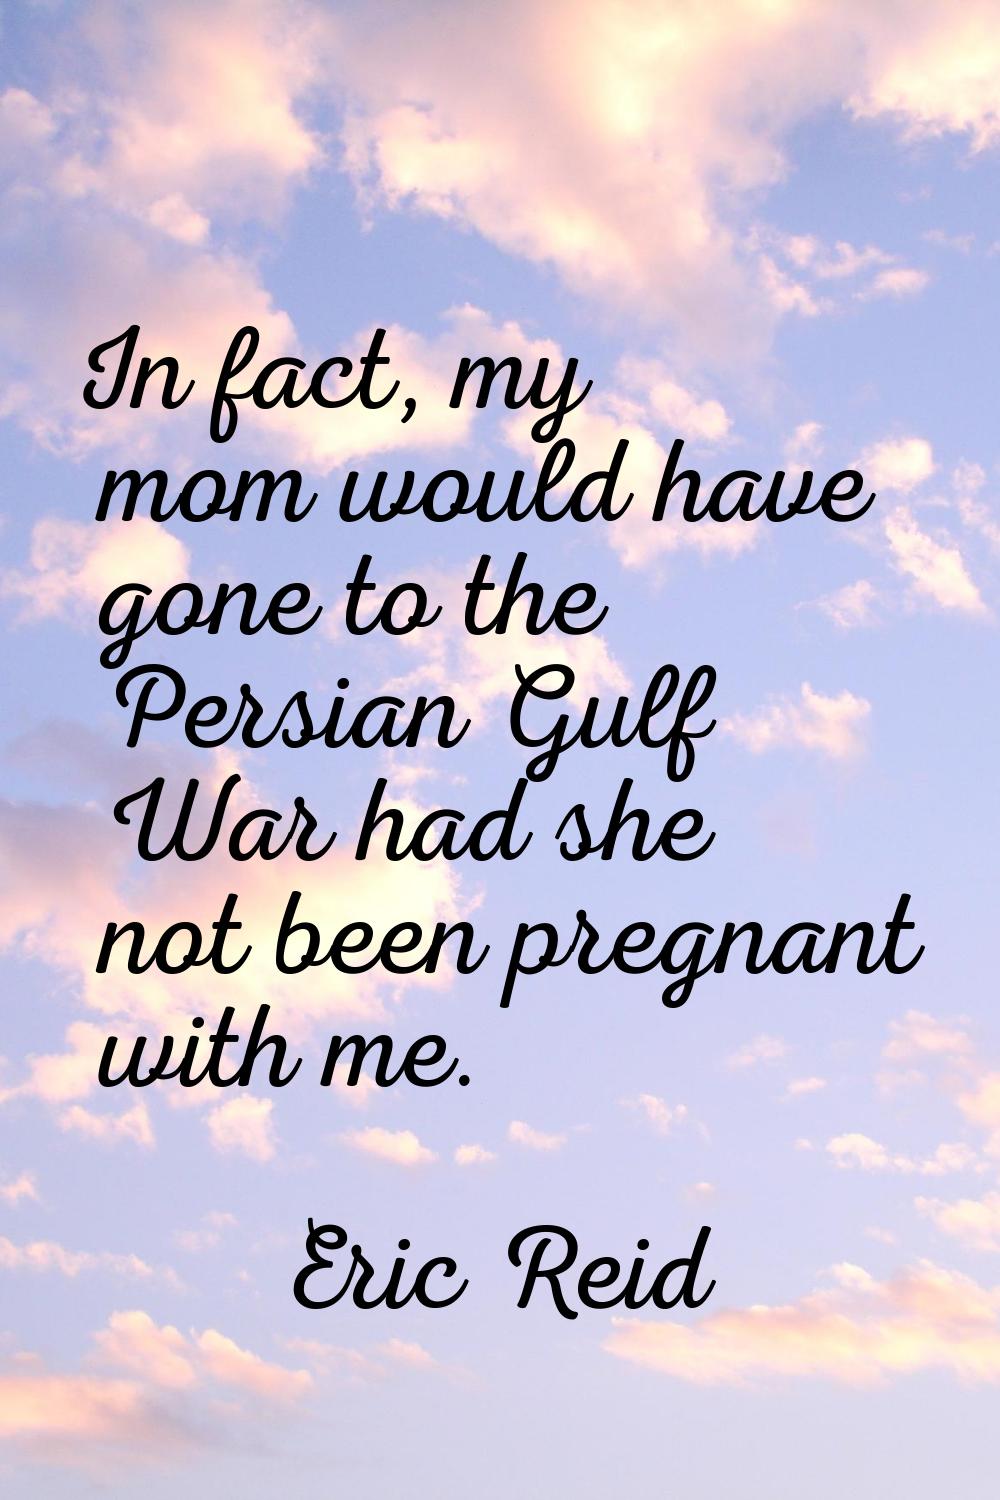 In fact, my mom would have gone to the Persian Gulf War had she not been pregnant with me.